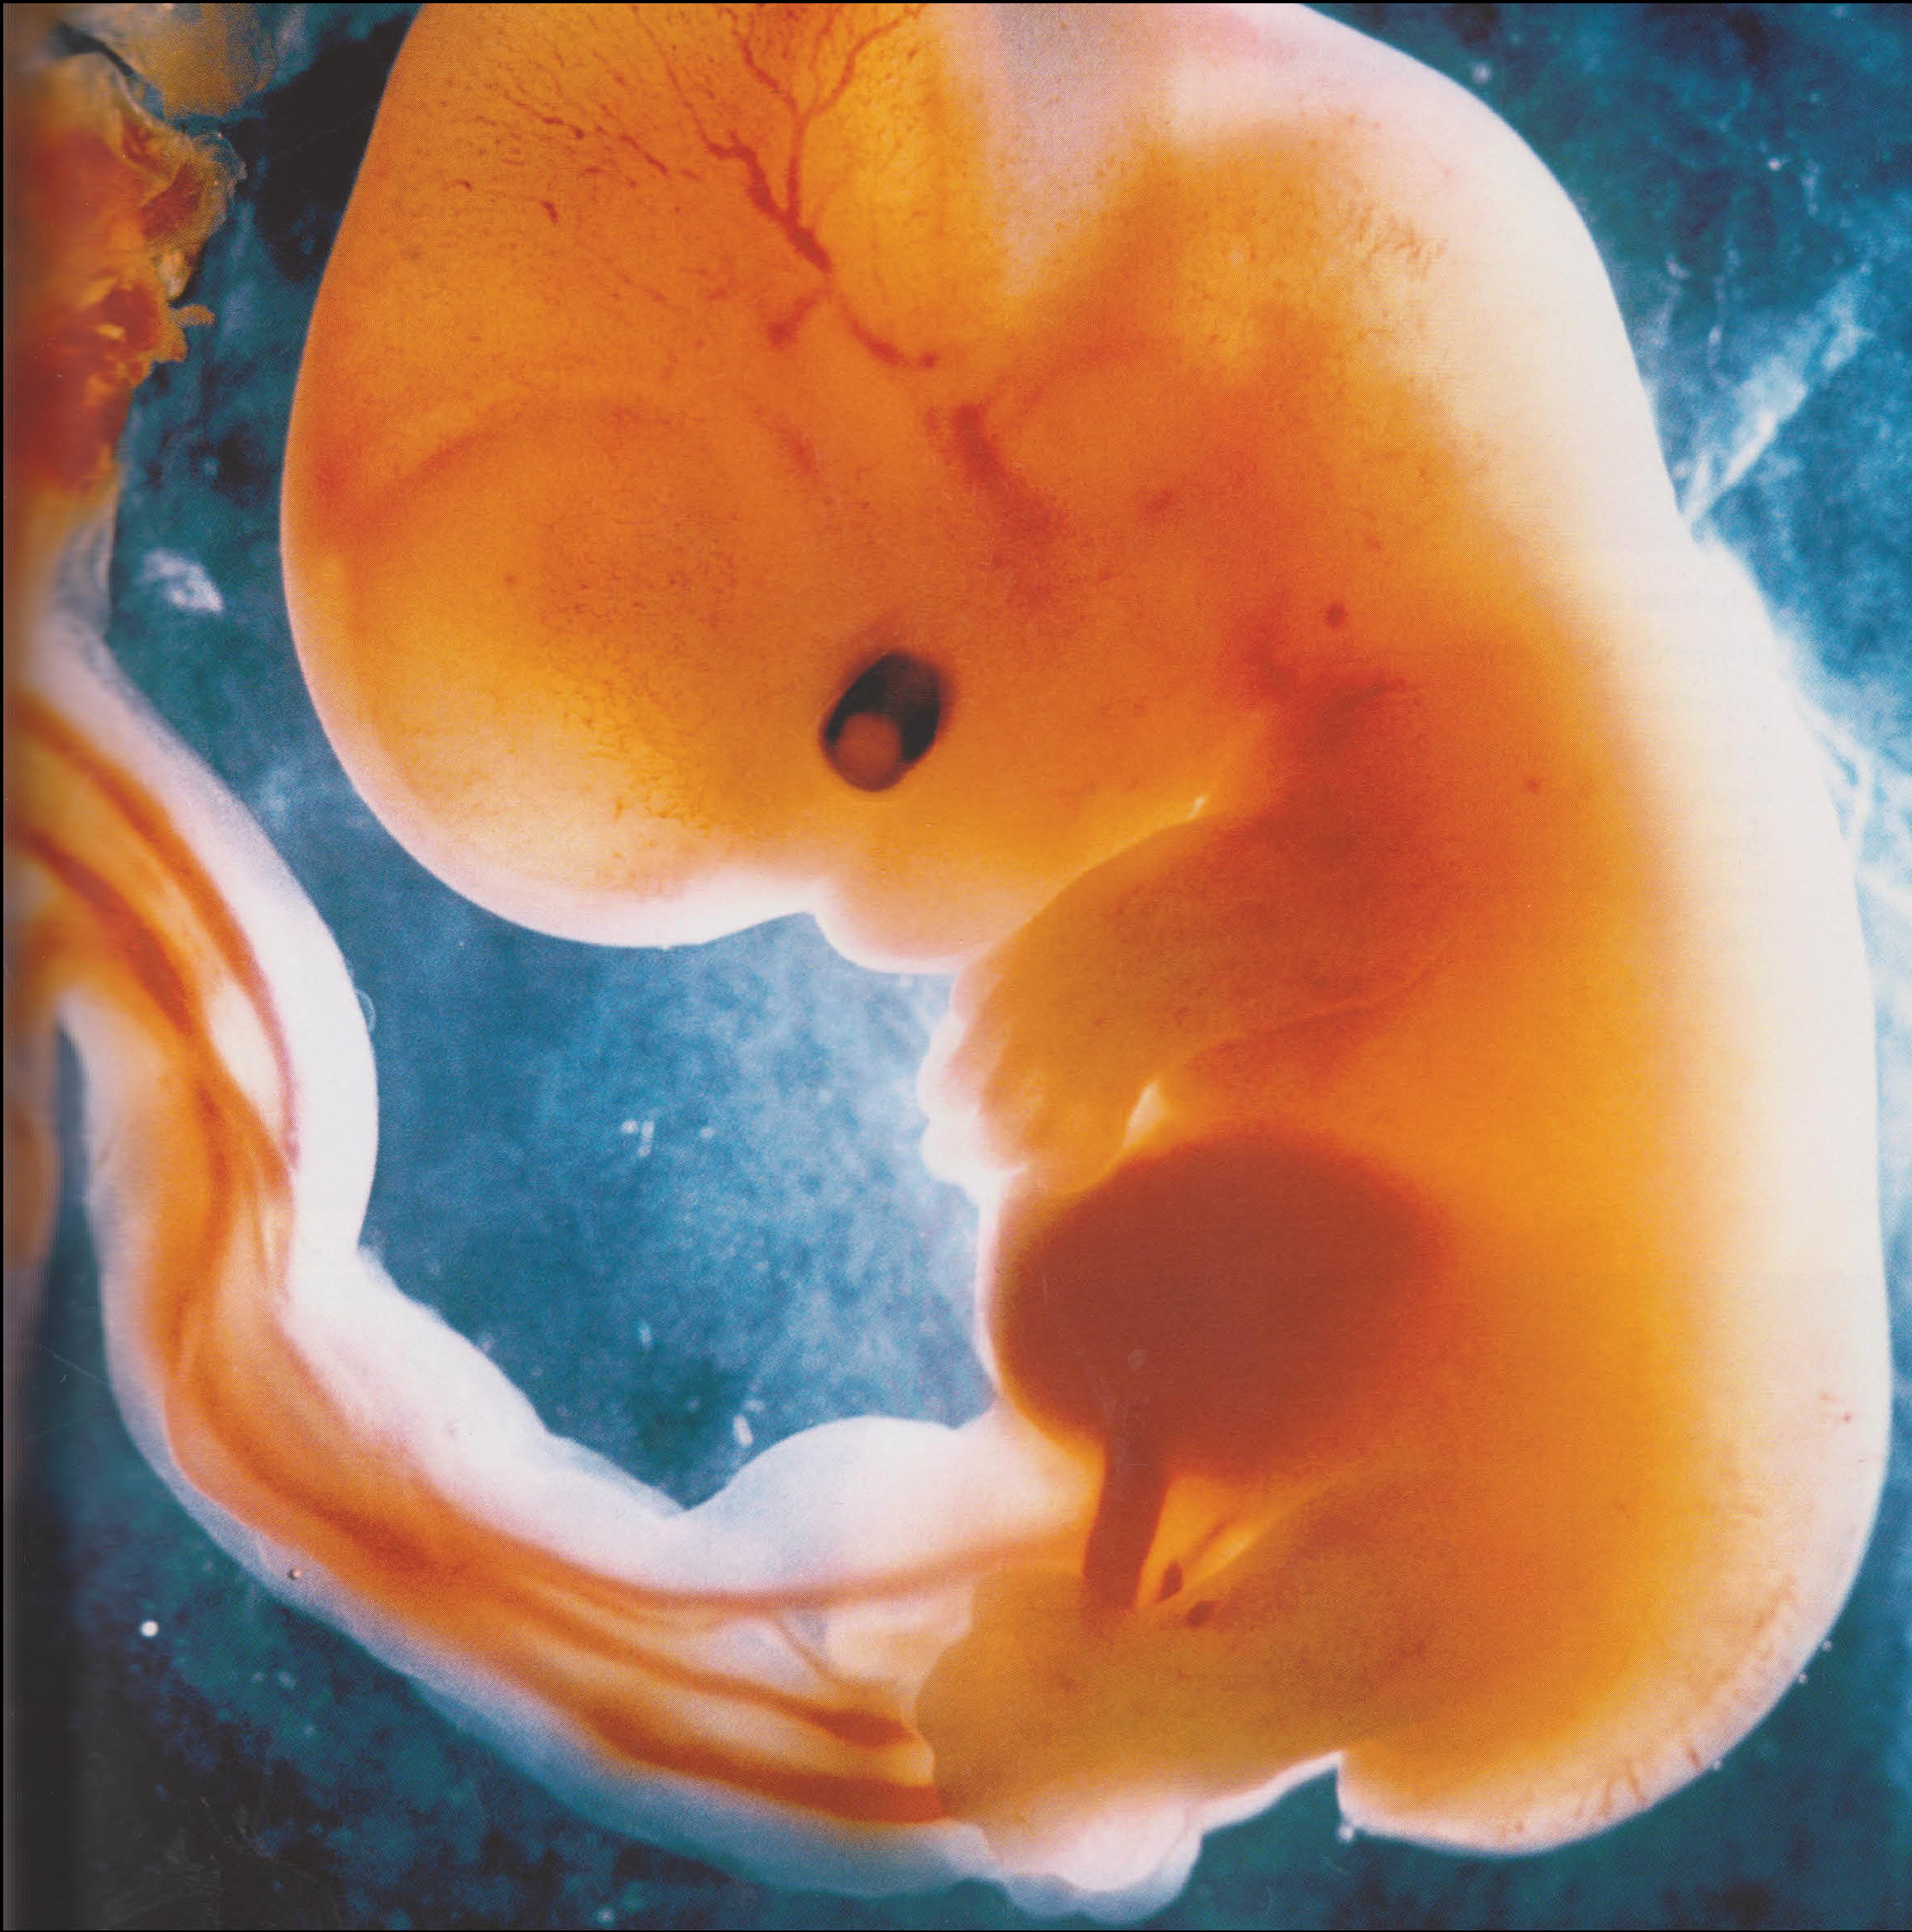 Human being at 6 weeks from fertilization